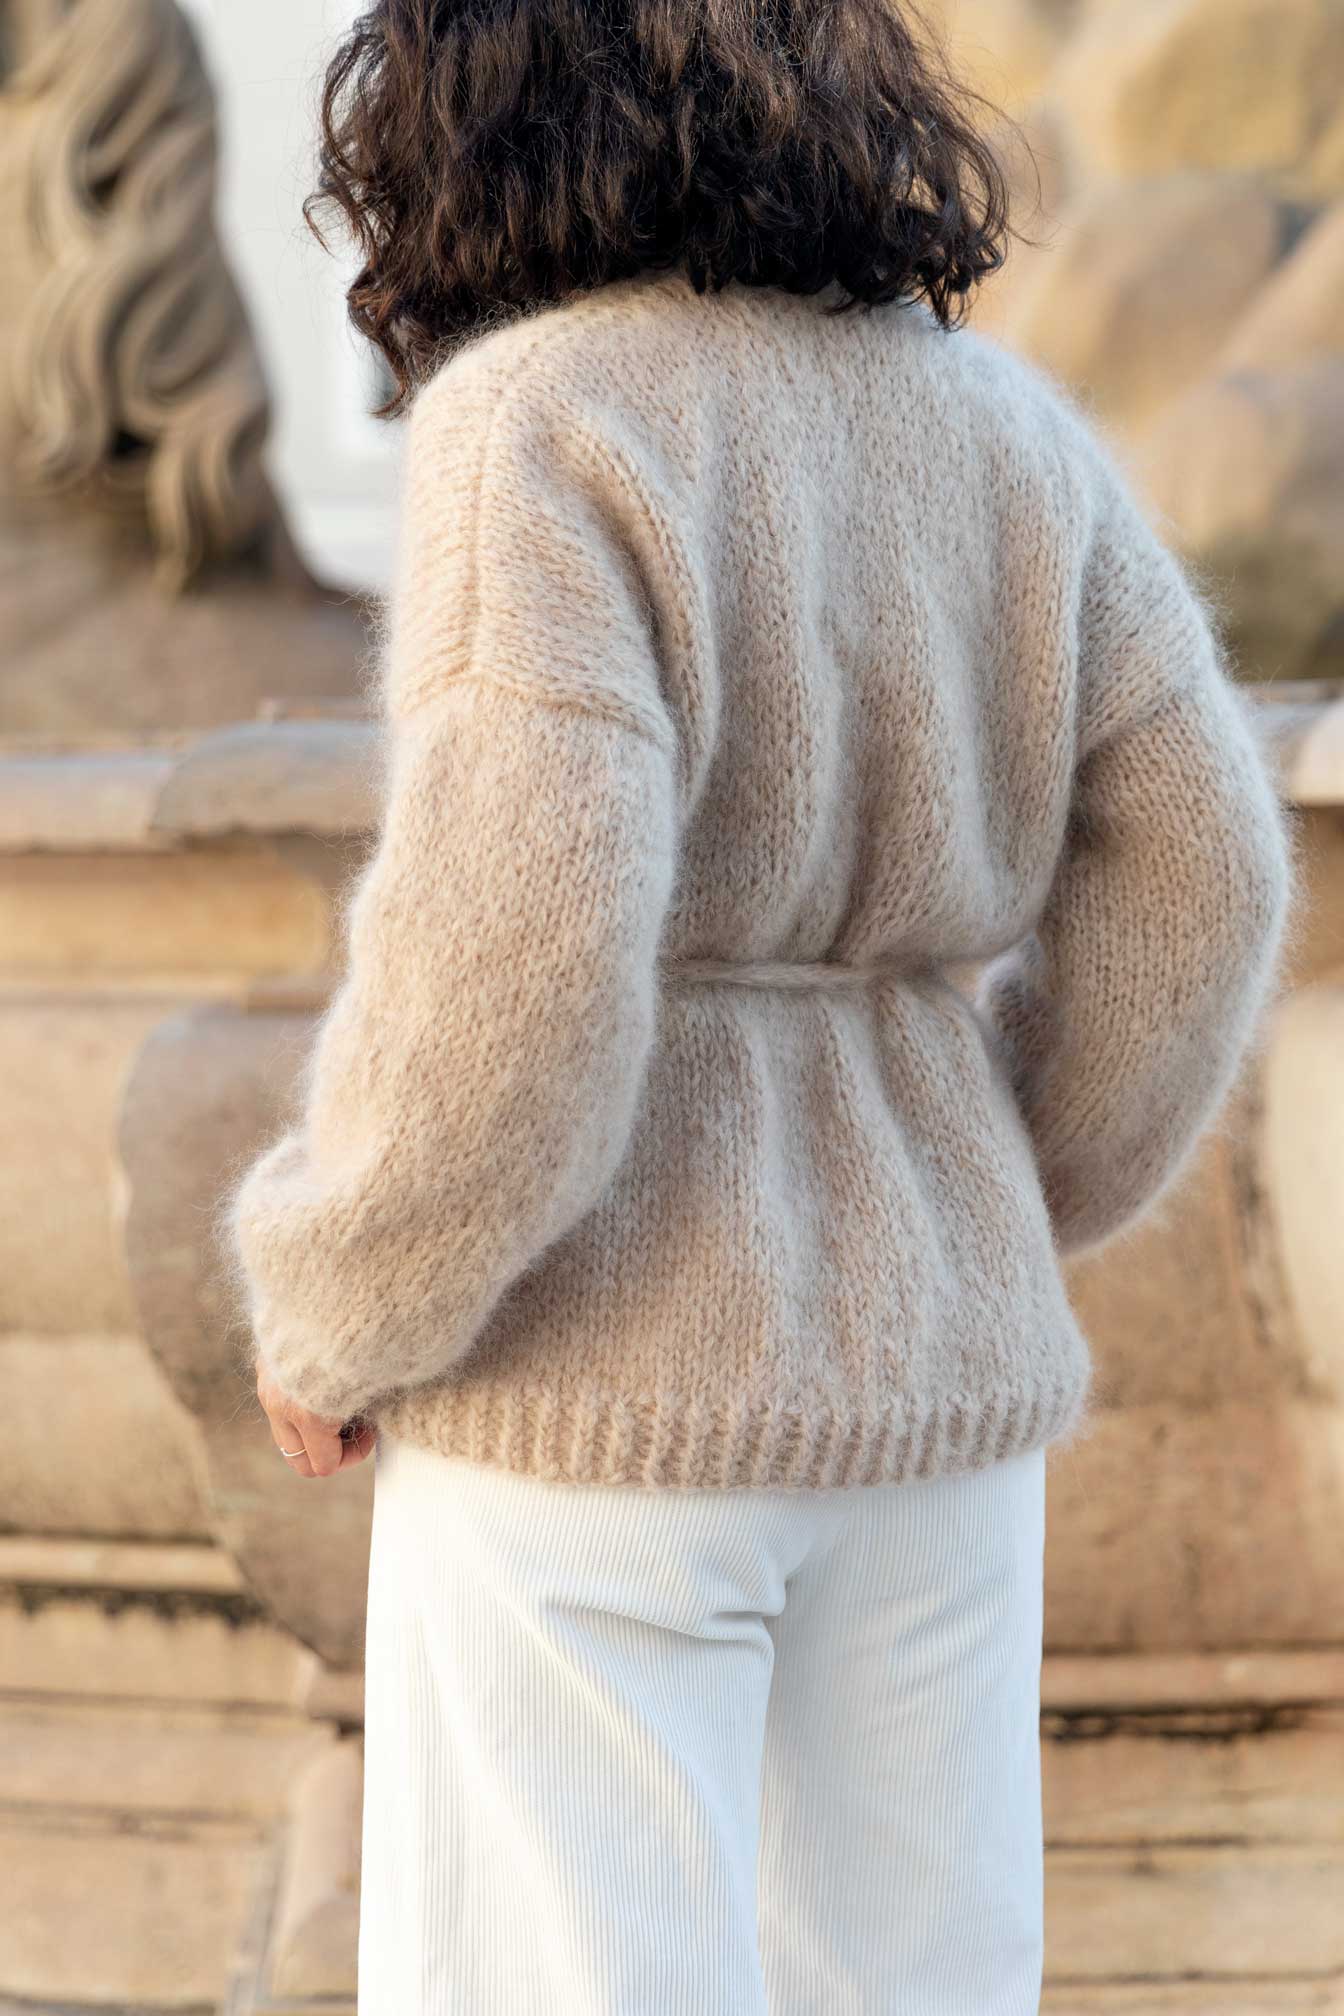 Beige mohair cardigan, handmade, with dropped shoulders and belt. Designed for a relaxed fit, is just as elegant as it is effortless. Style it with casual jeans or a slip dress. Made from premium Italian yarn.